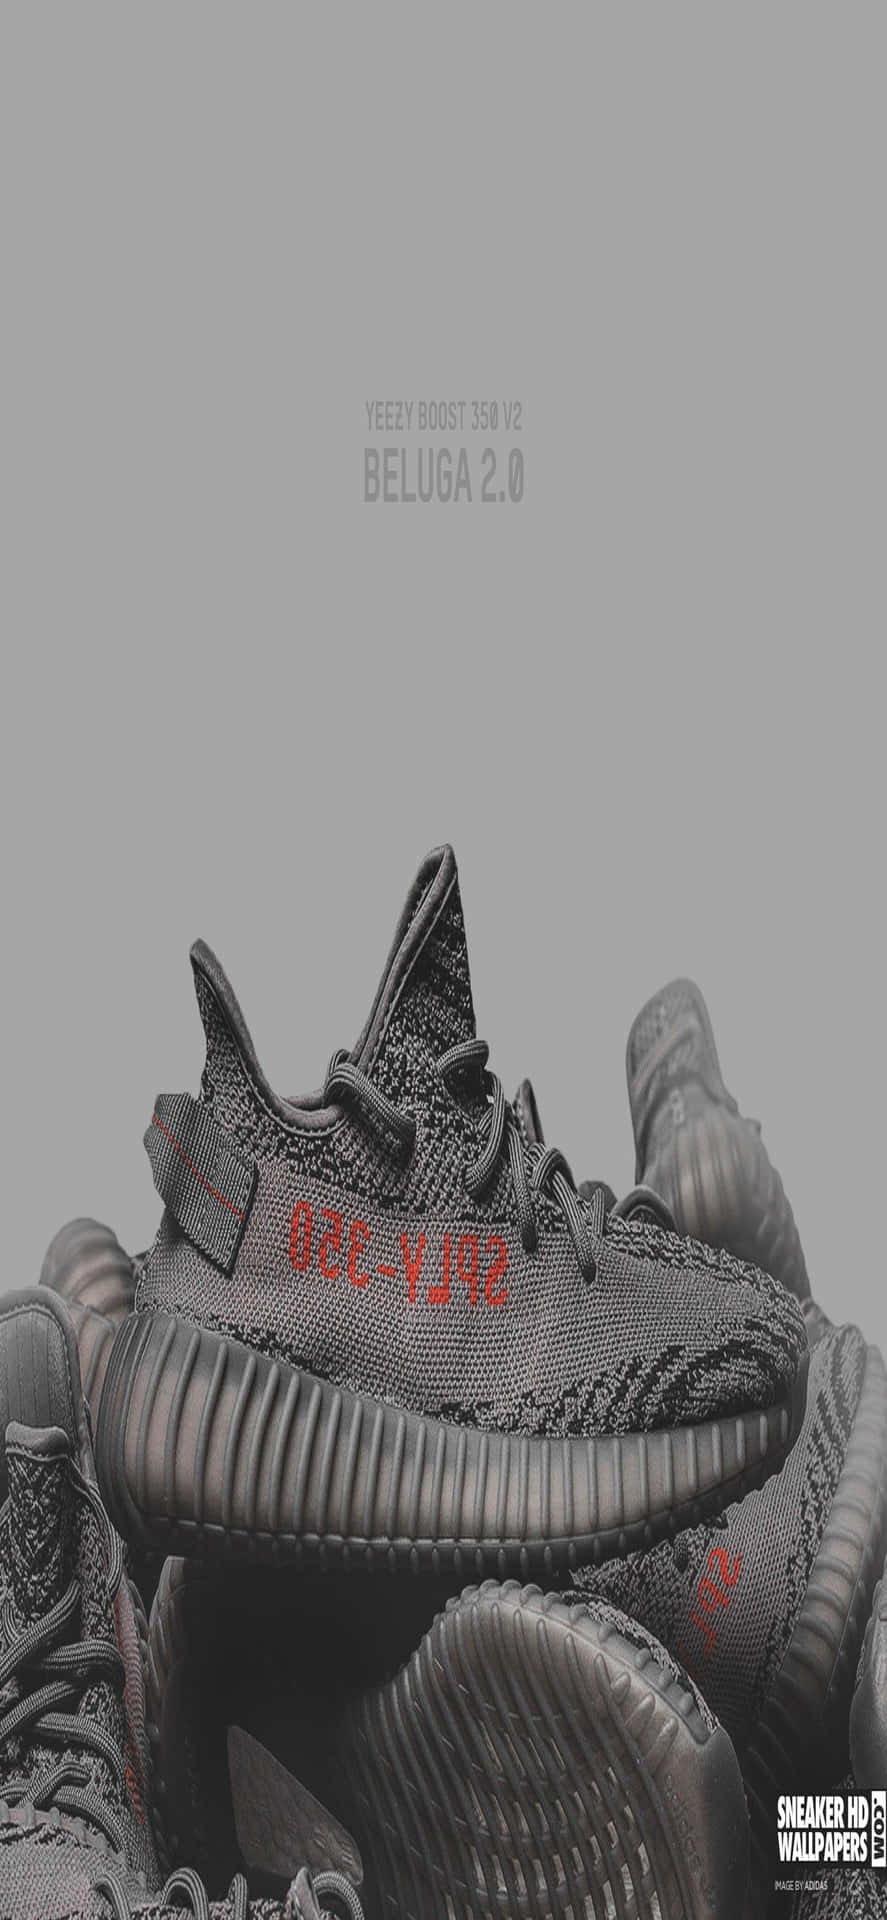 New UA Yeezy Boost 350 V2 SPLY 350 Oreo with Big Discount 